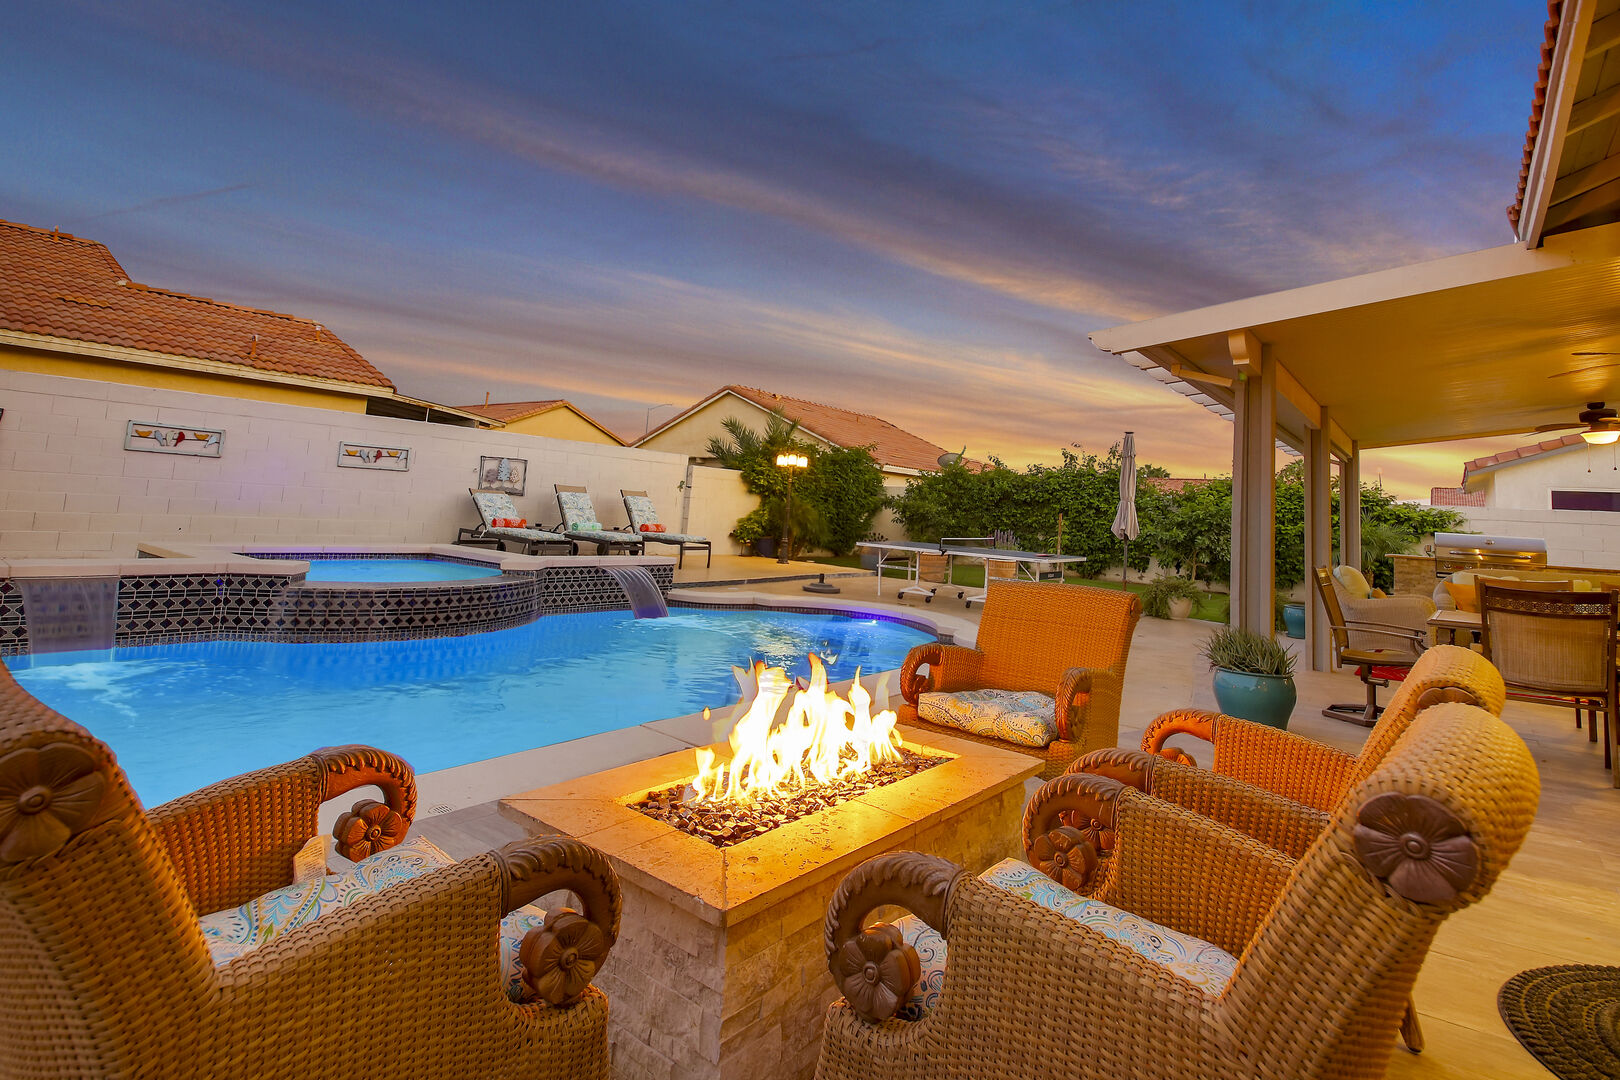 Relax by the cozy natural gas fire pit with seating for four.